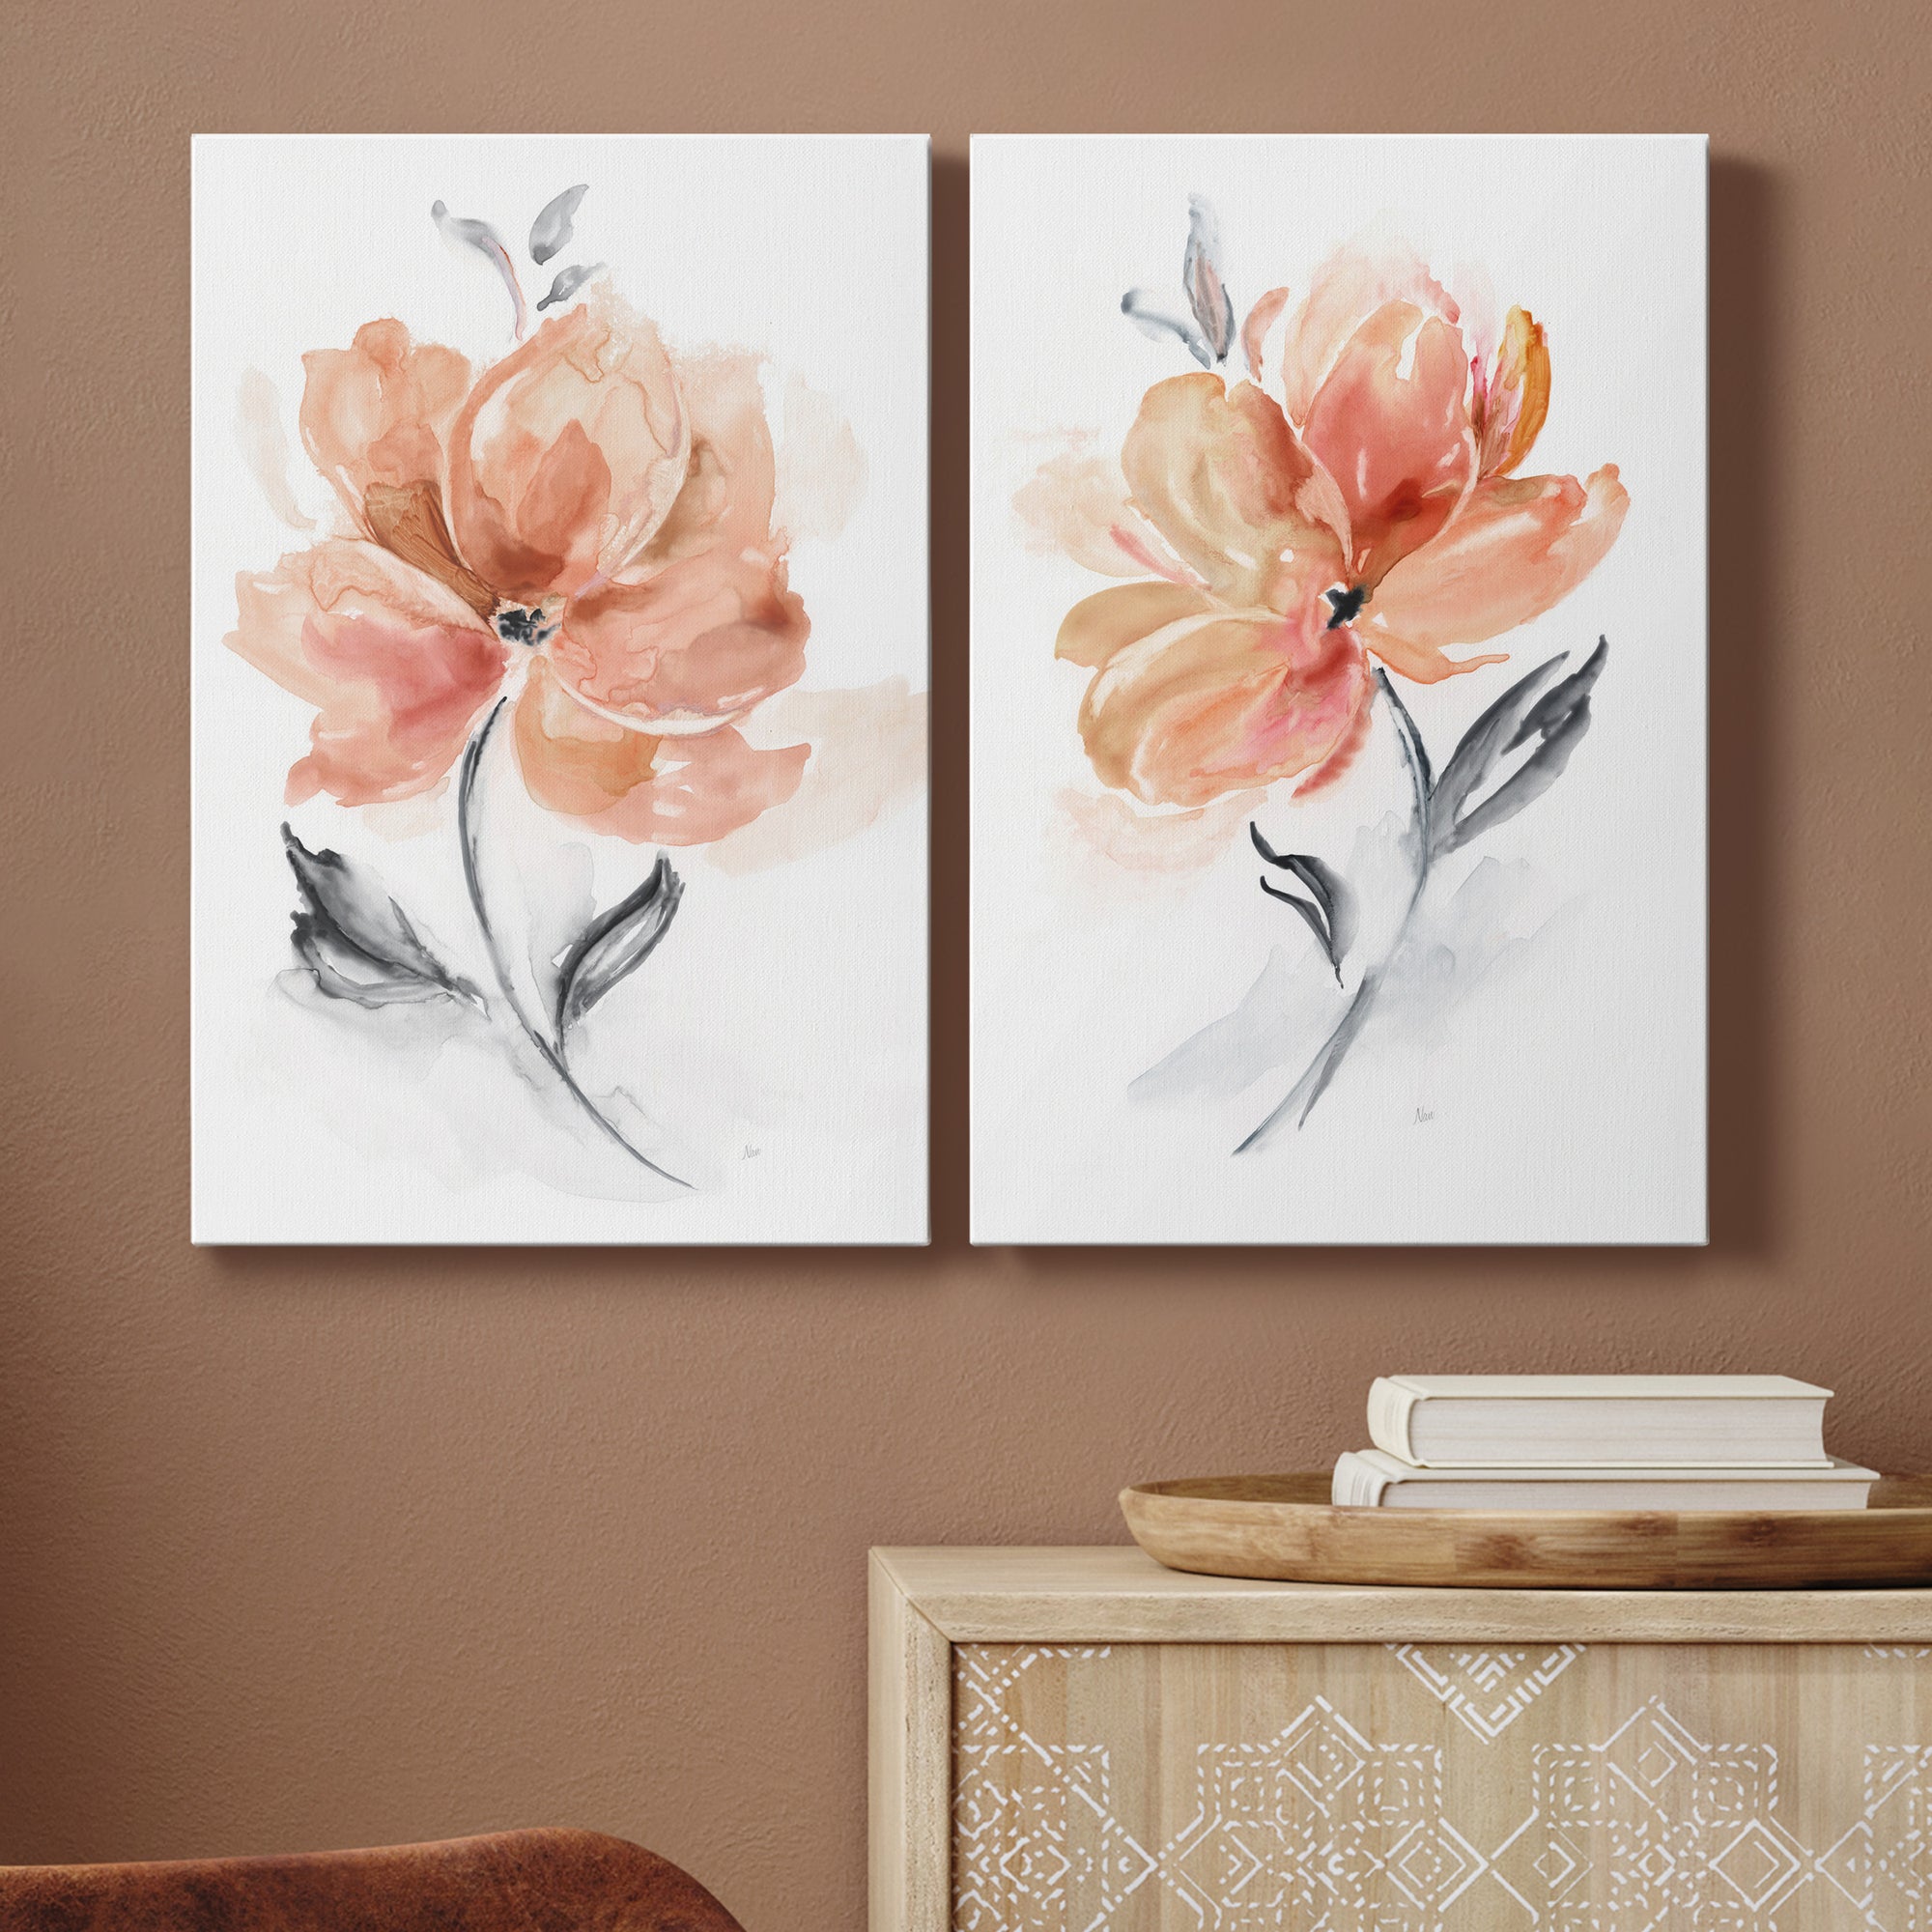 Soft Sensation I Premium Gallery Wrapped Canvas - Ready to Hang - Set of 2 - 8 x 12 Each